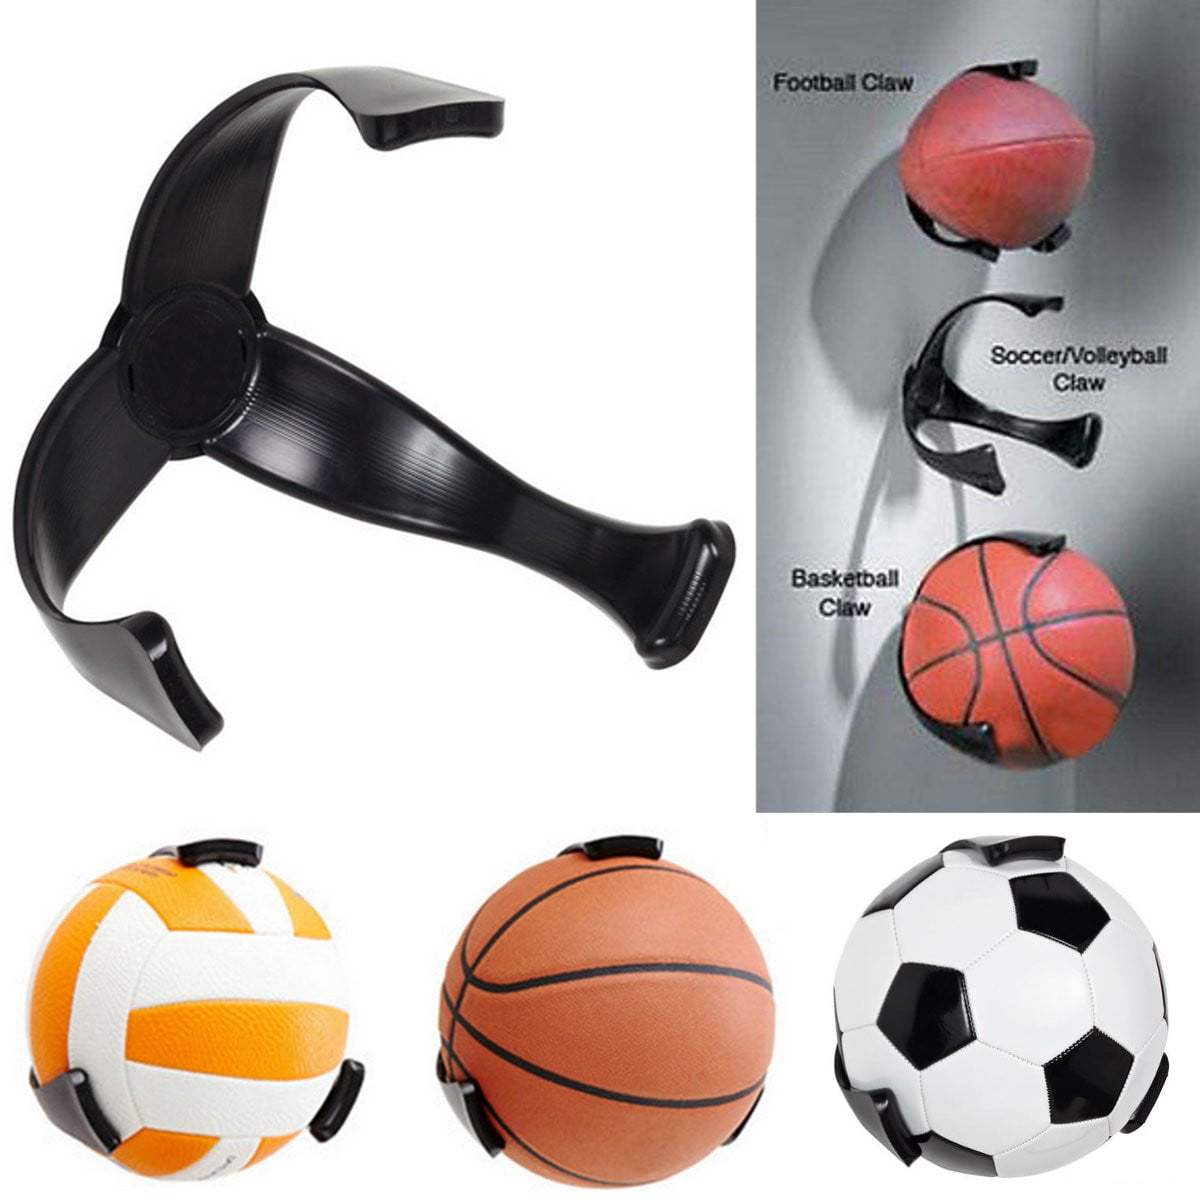 Ball Claw Wall Mount Rack Holder Display for Rugby Soccer Football Basketball 